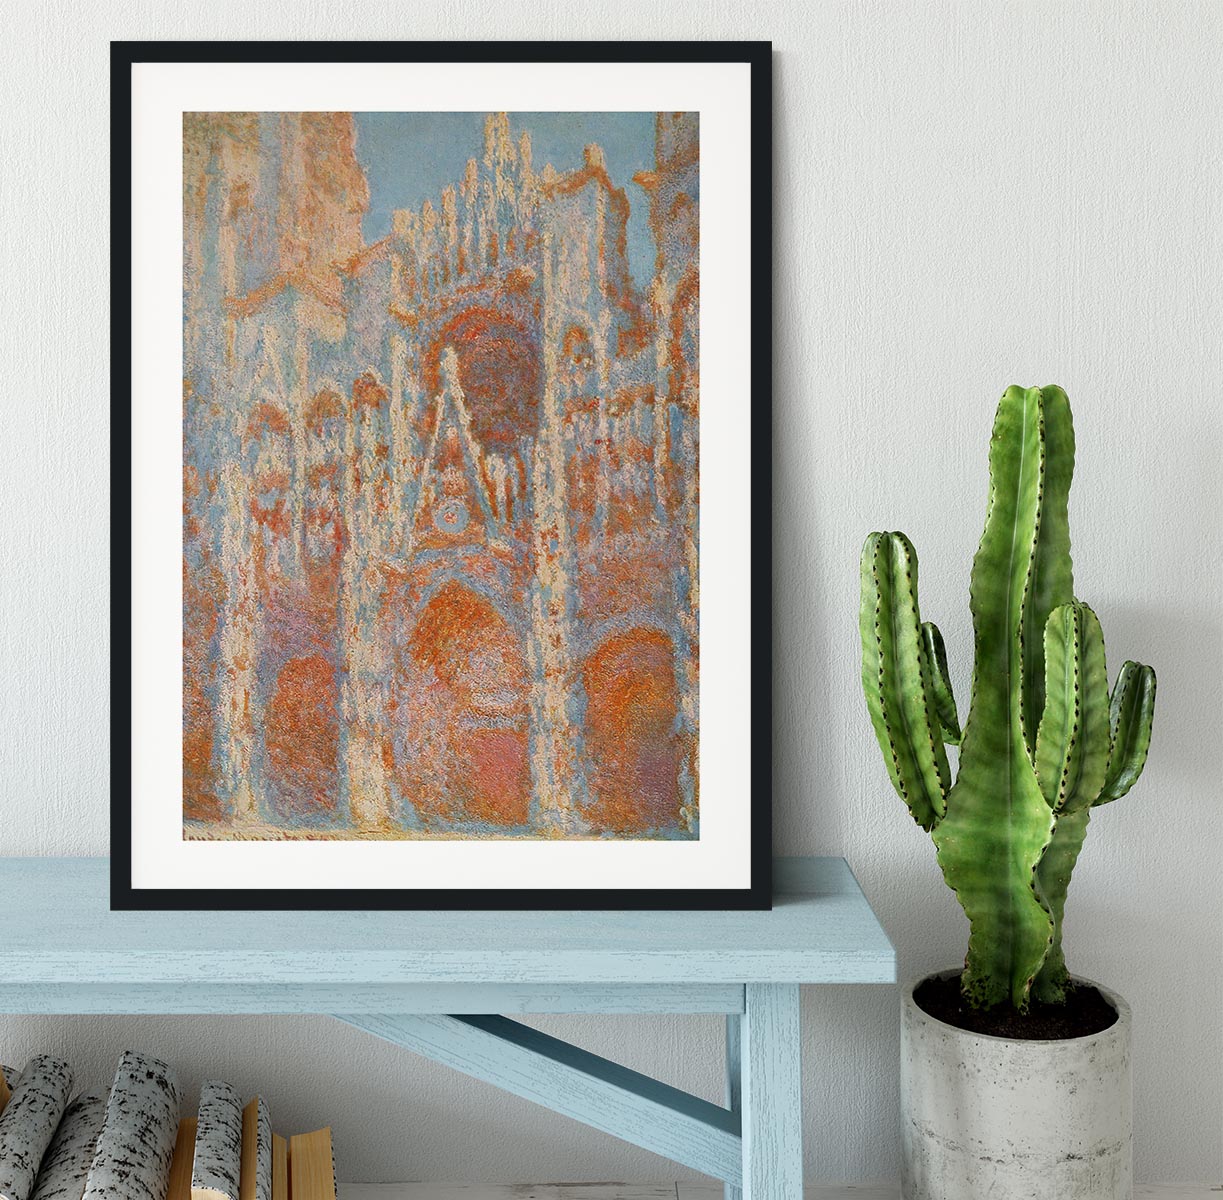 The Rouen Cathedral The facade at sunset by Monet Framed Print - Canvas Art Rocks - 1